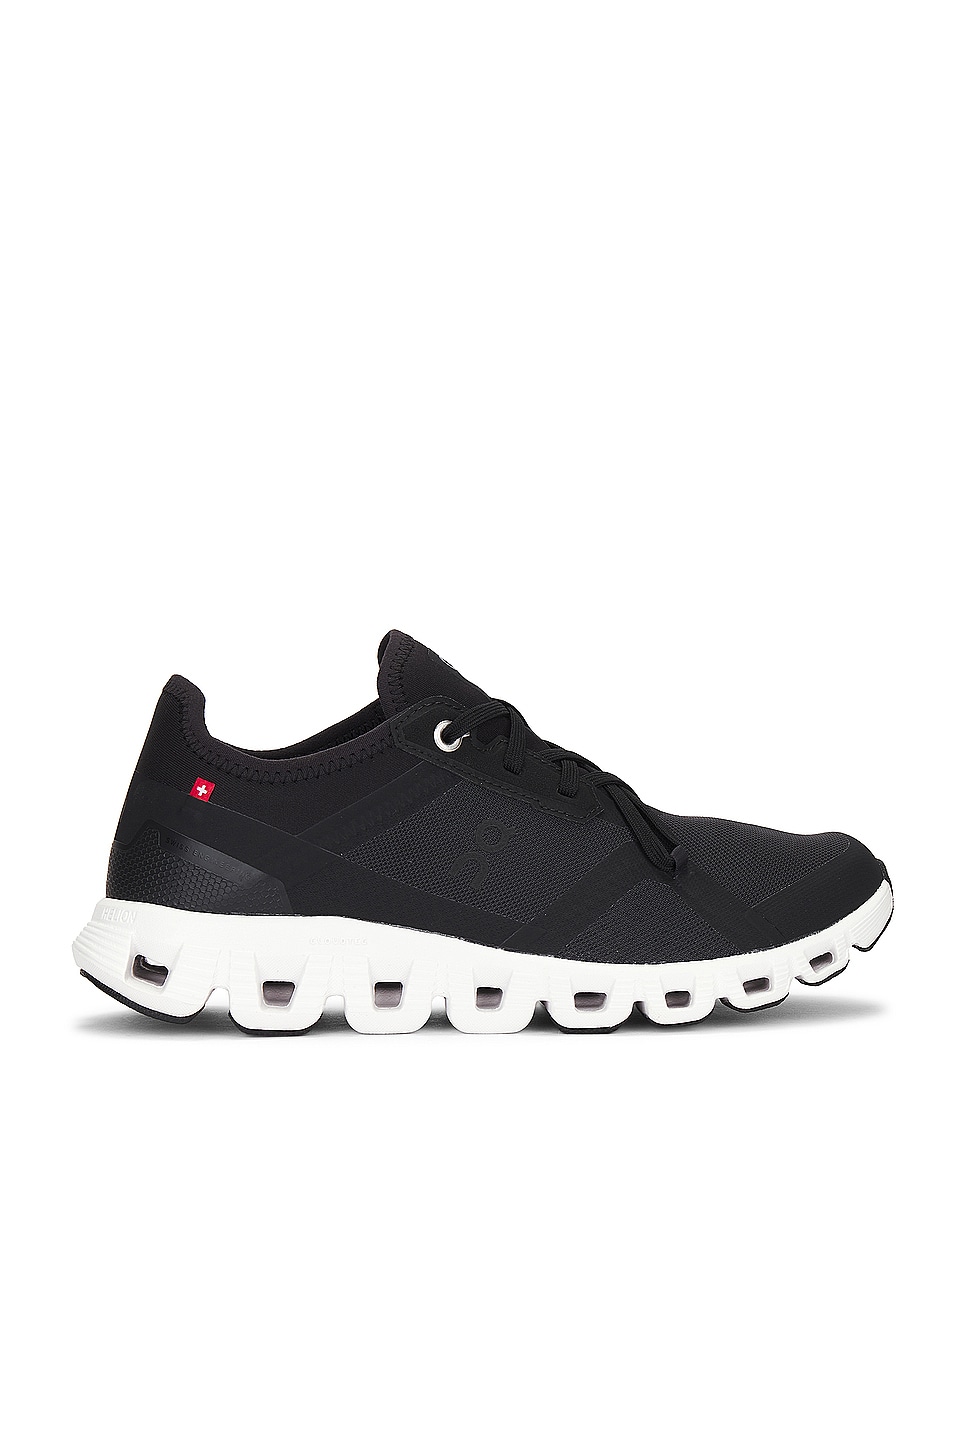 Image 1 of On Cloud X 3 Ad Sneaker in Black & White